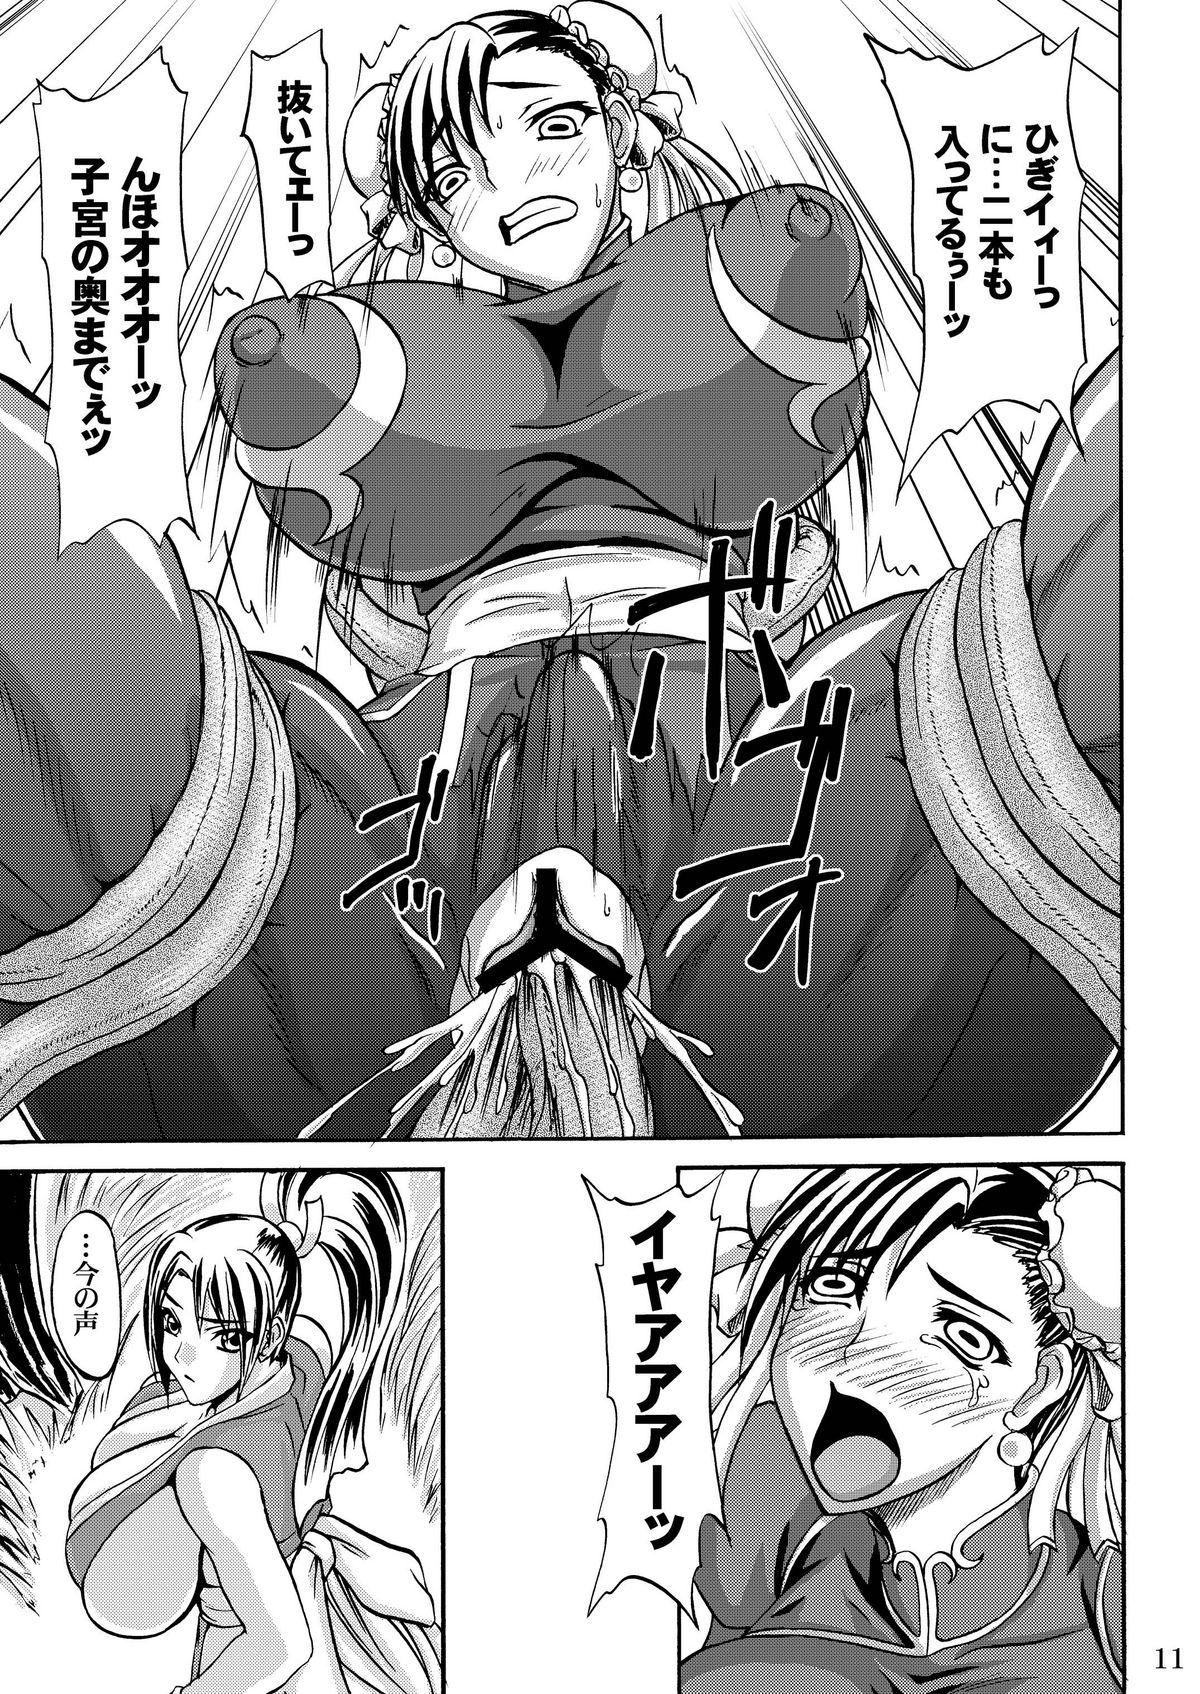 Booty Tamashii no Kyouen - Street fighter King of fighters Soulcalibur Concha - Page 11